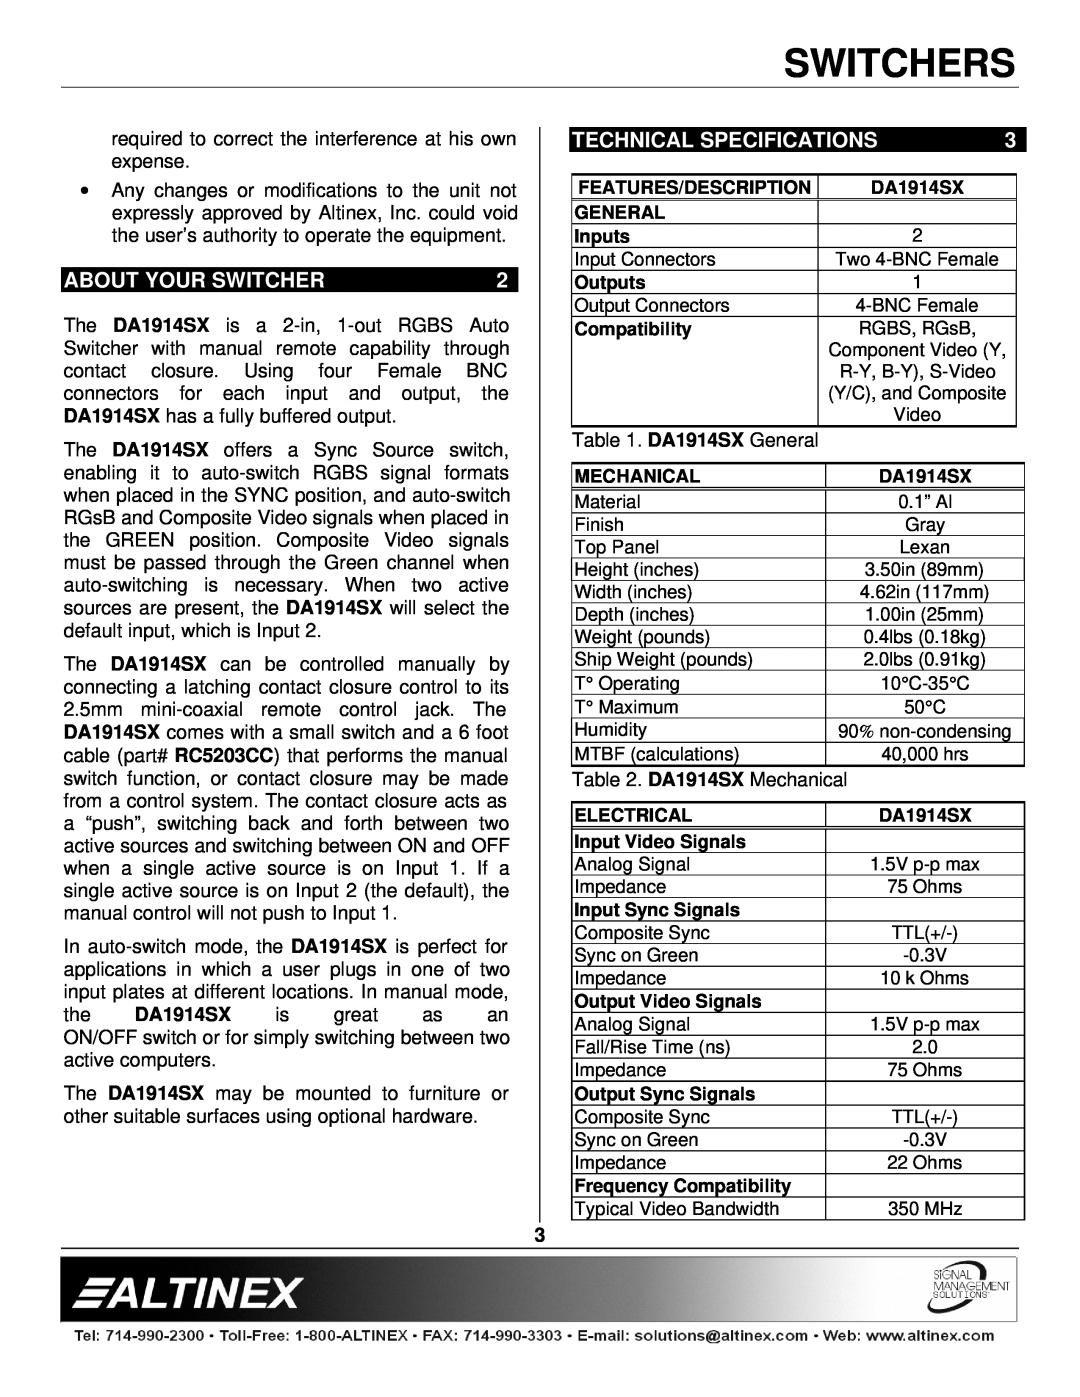 Altinex DA1914SX manual Technical Specifications, About Your Switcher, Switchers 